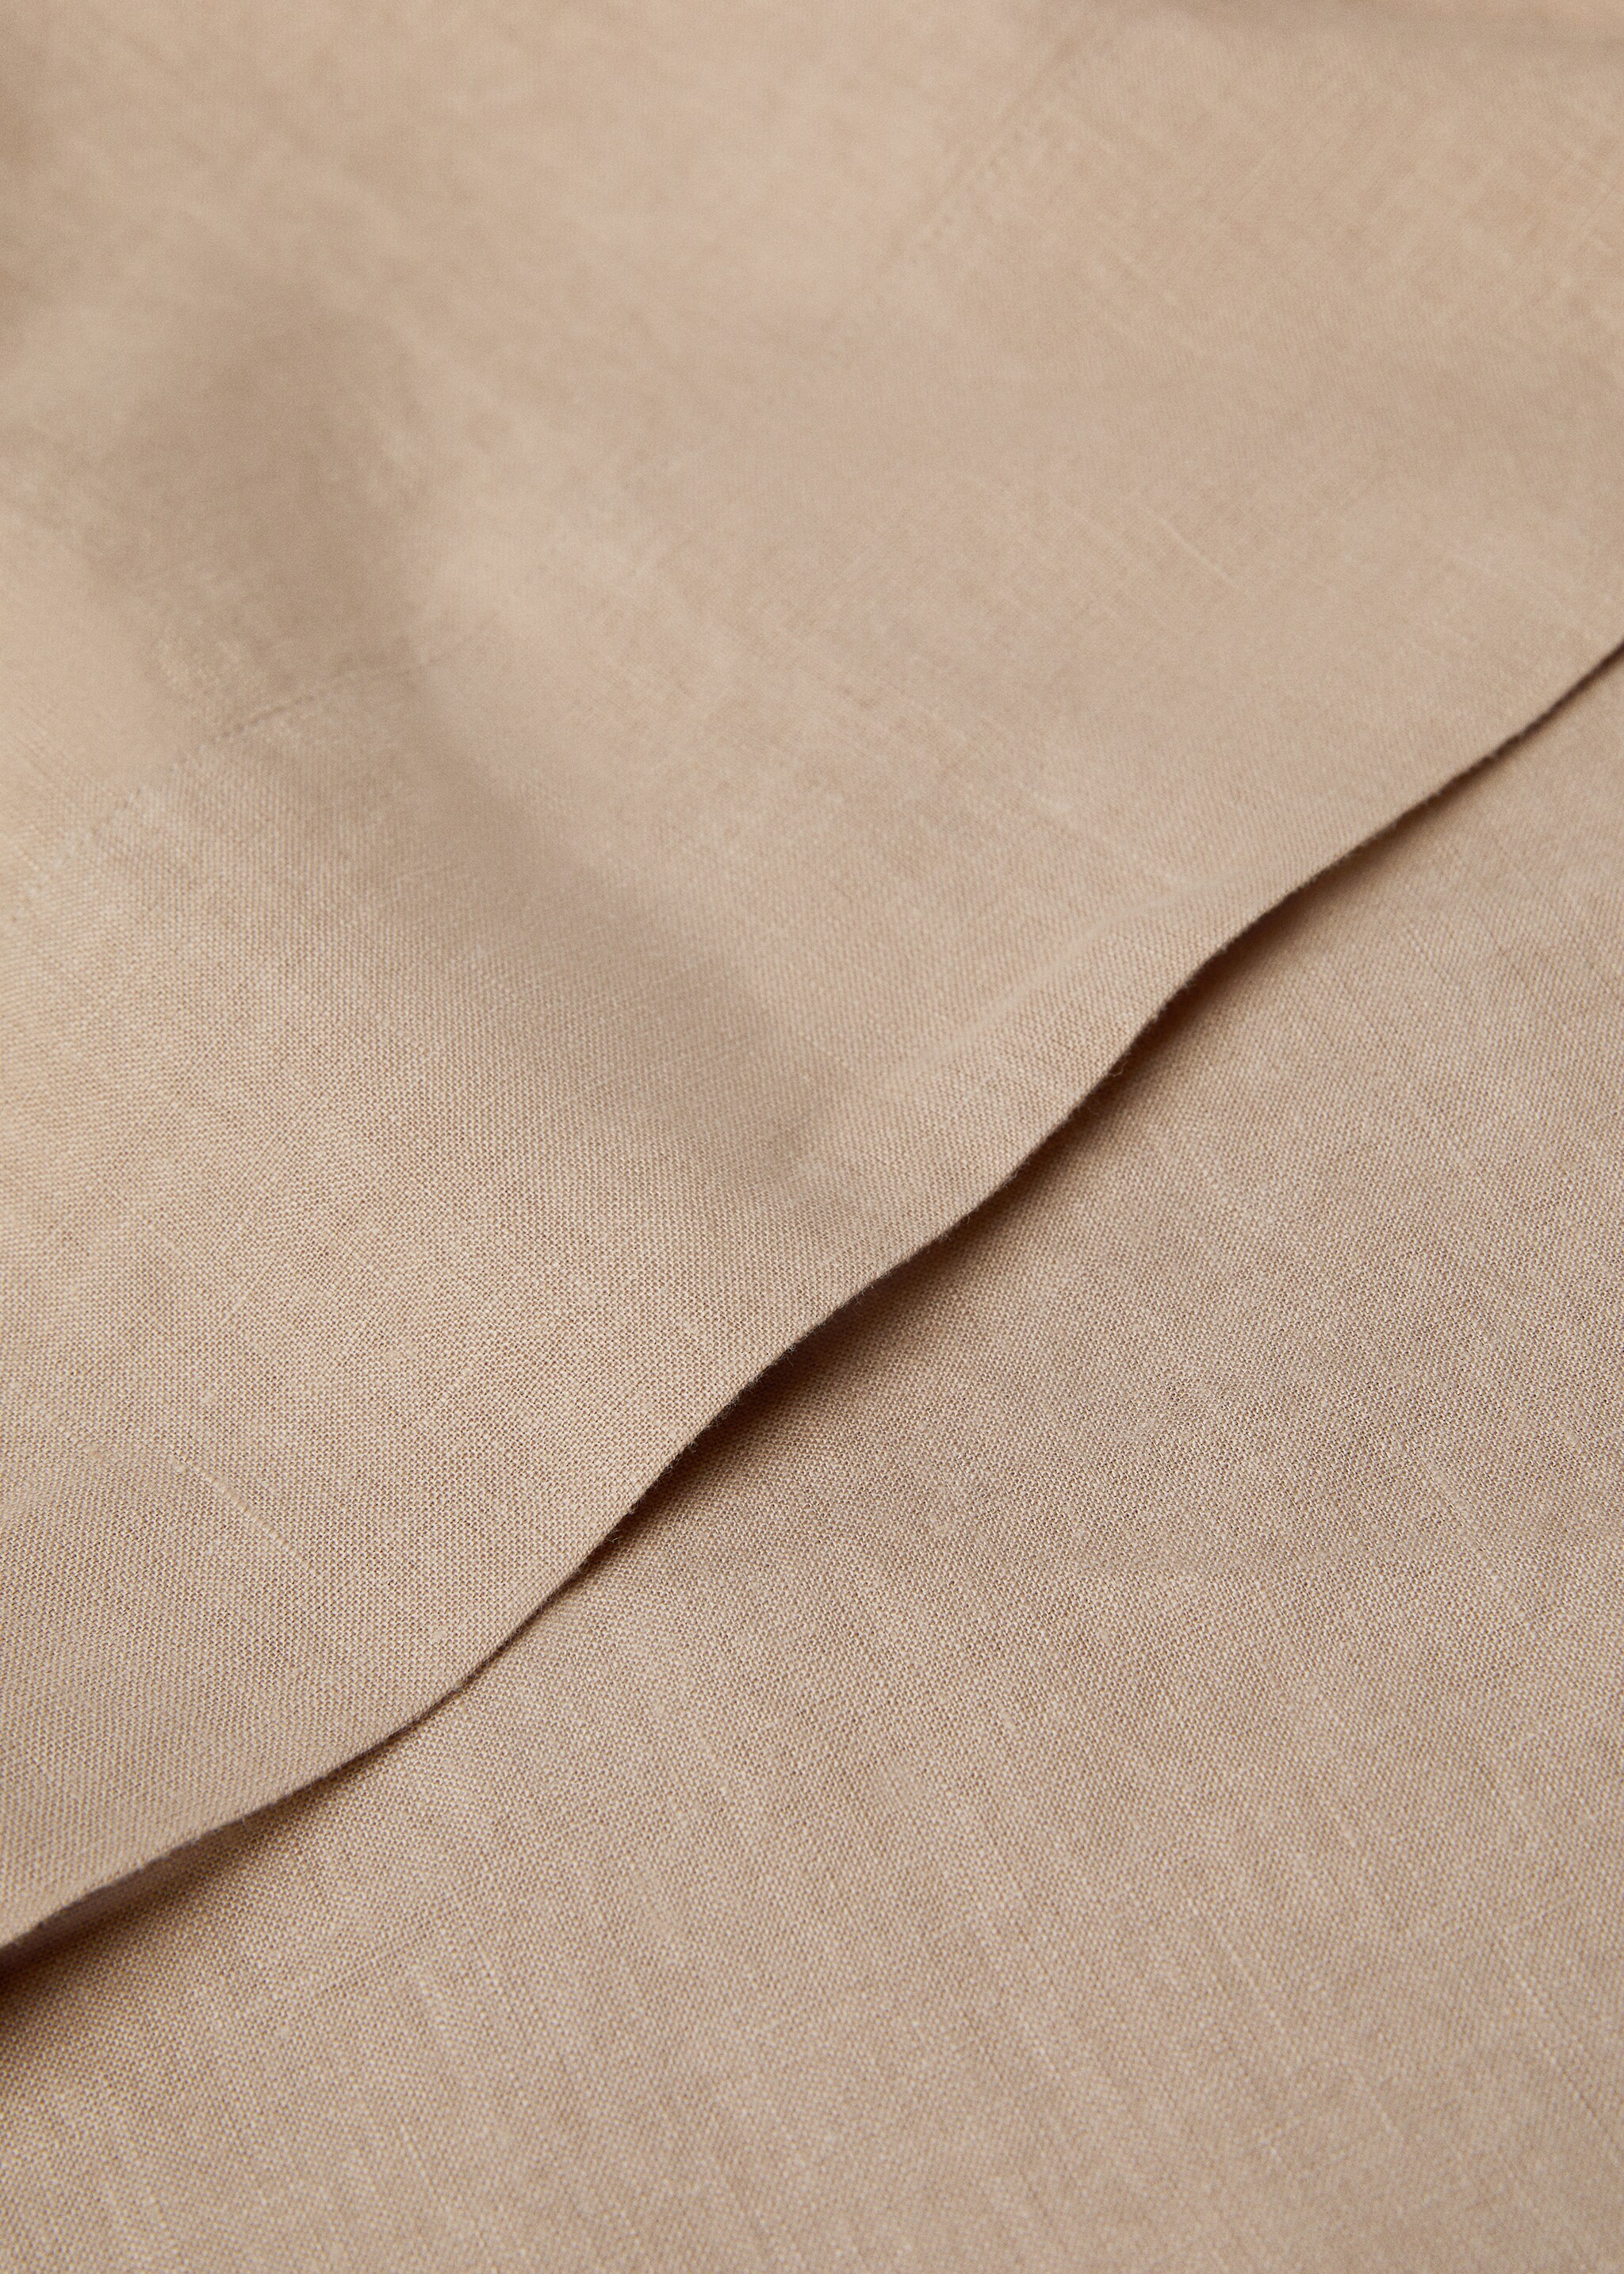 100% linen top sheet King bed - Details of the article 2